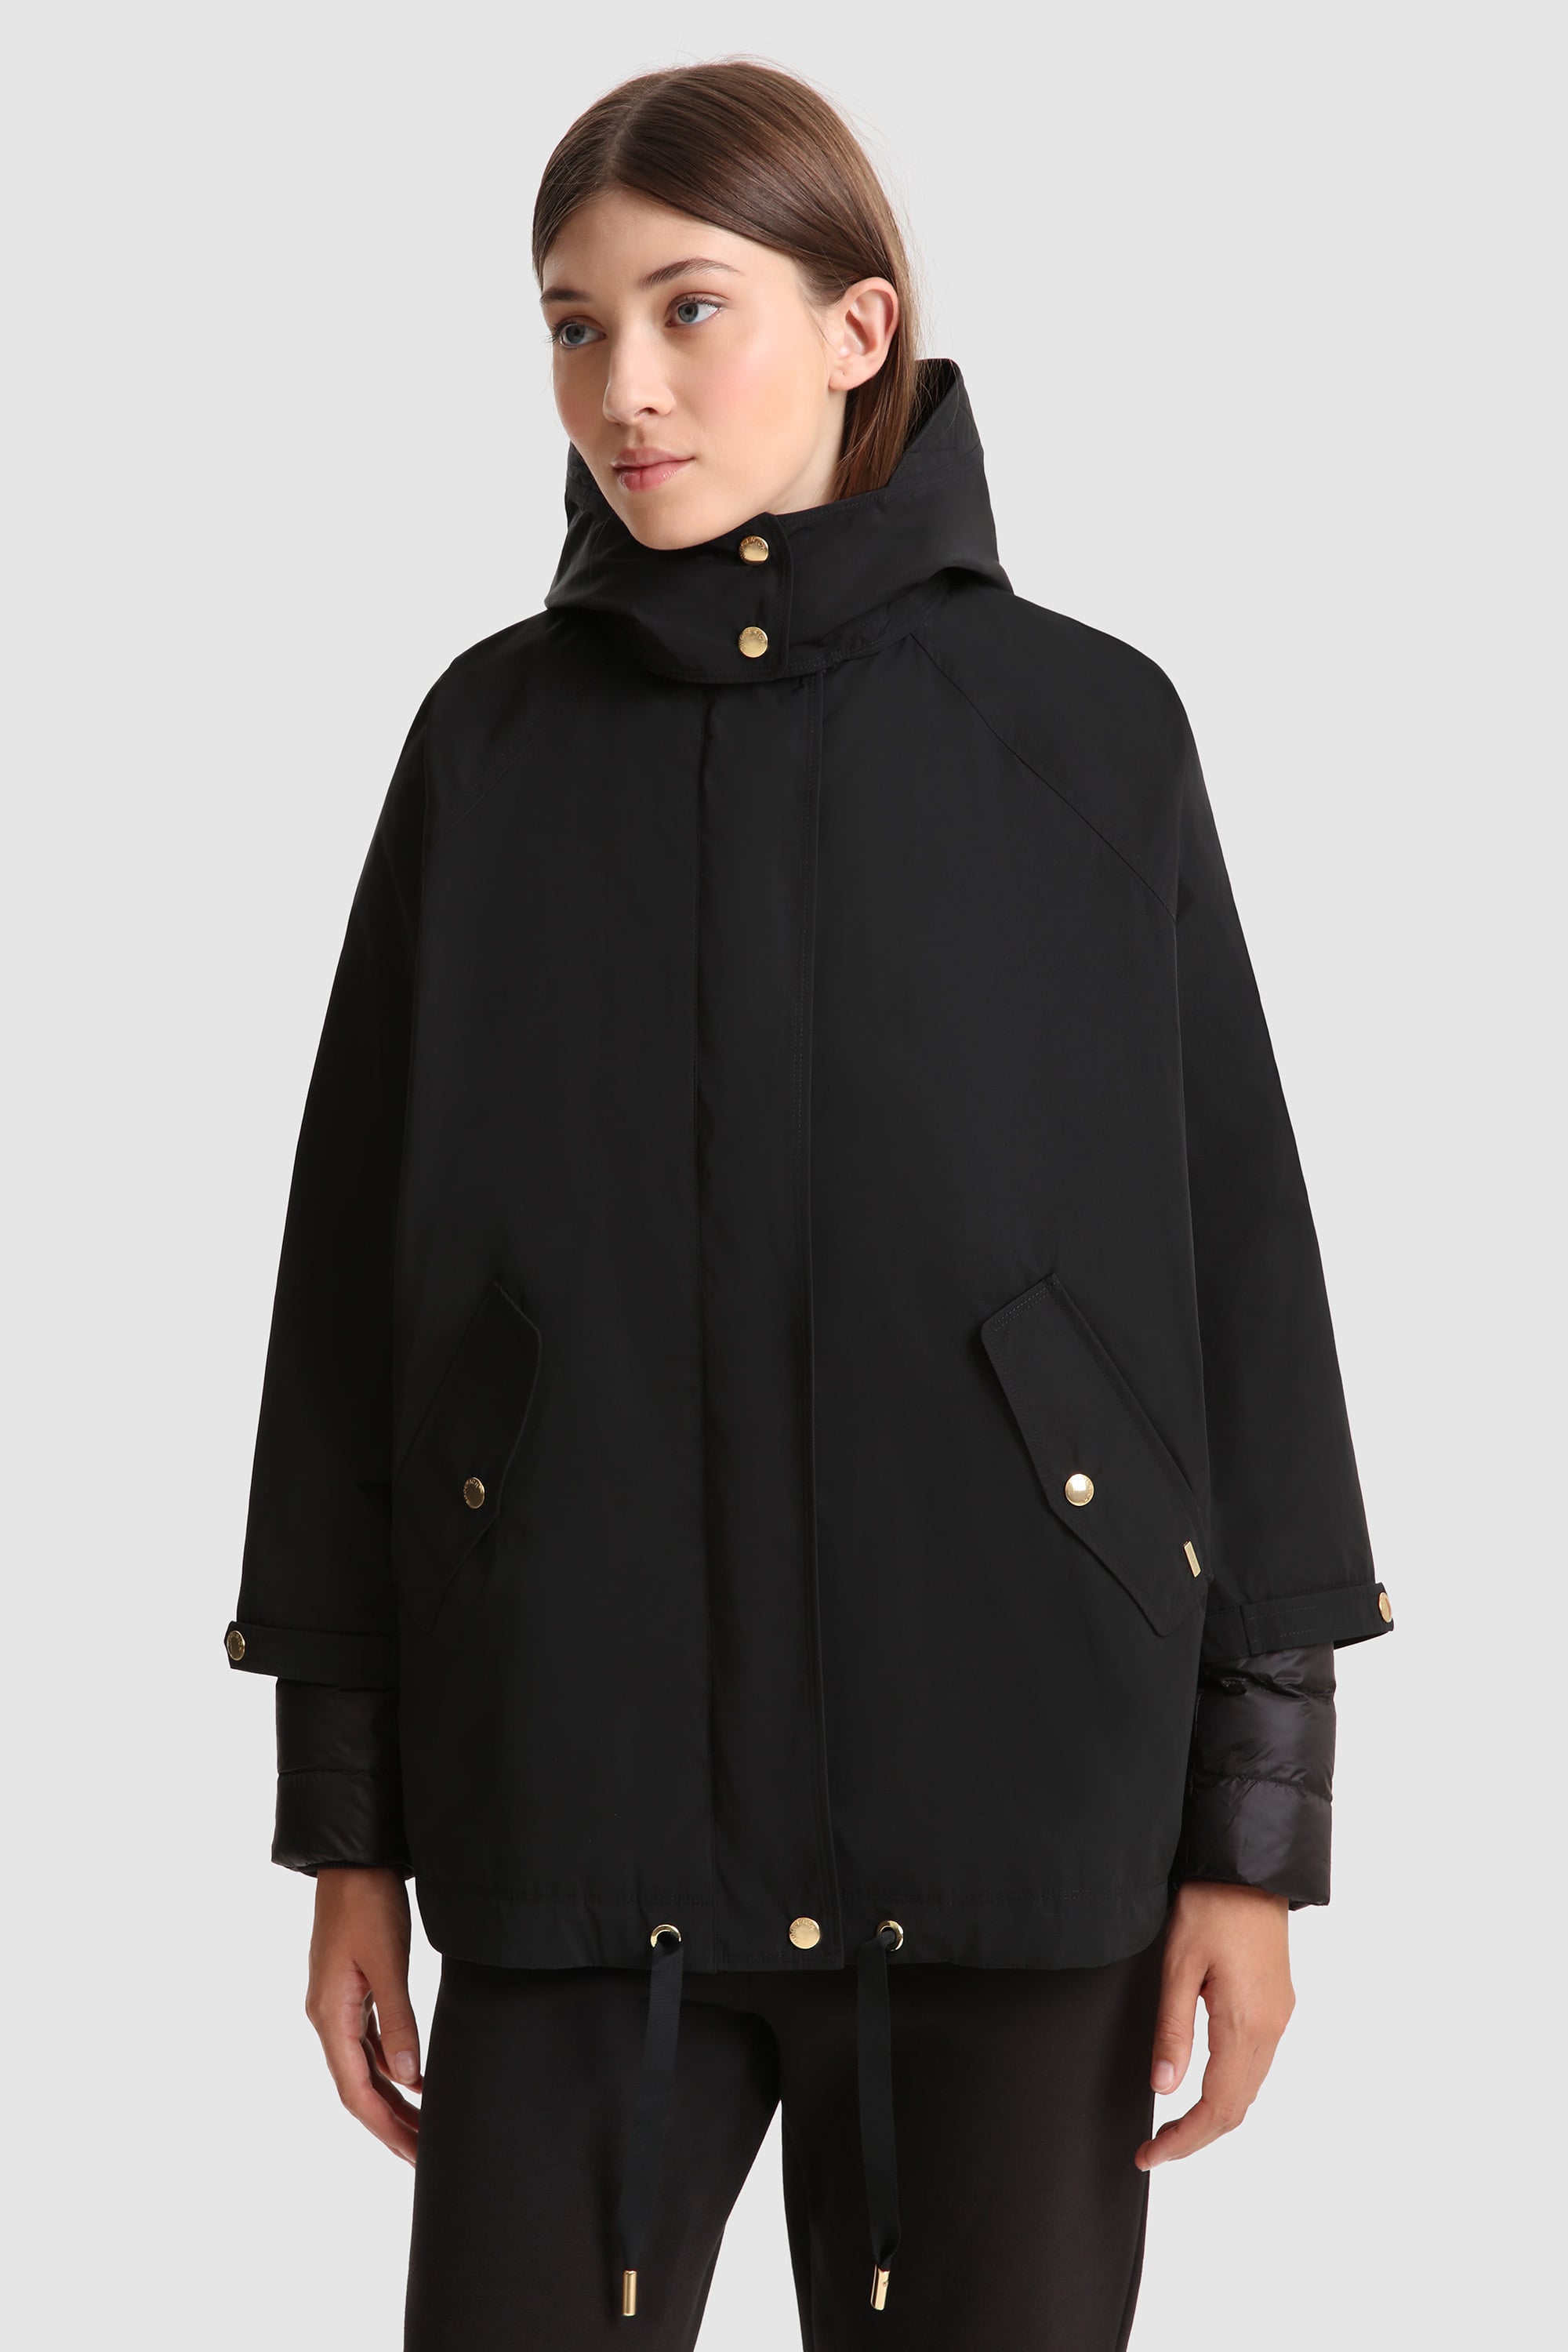 SIPSEY 3IN1 ANORAK